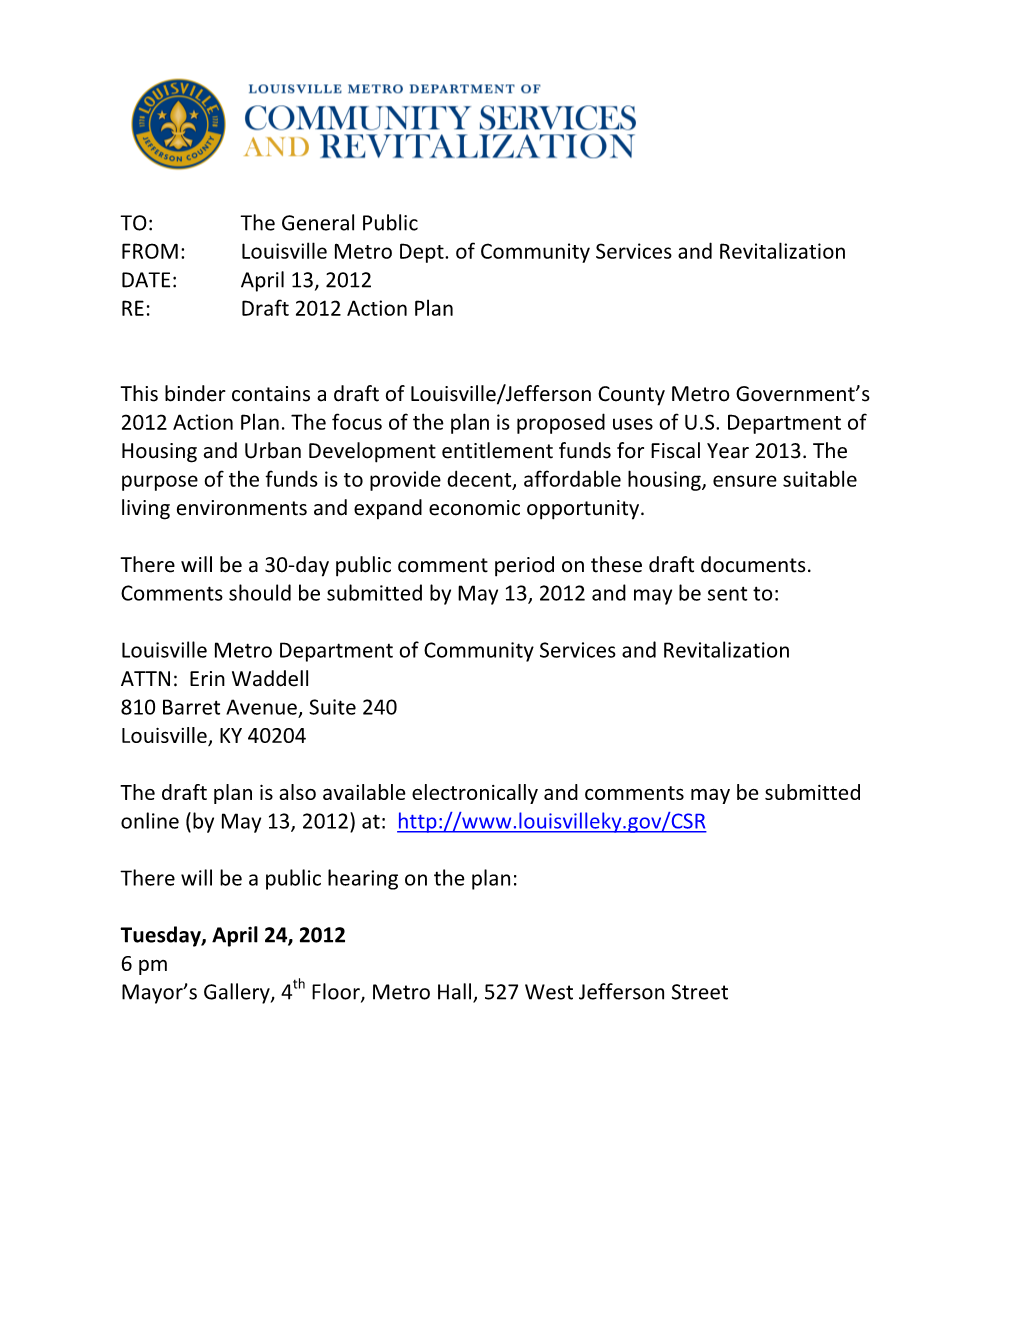 TO: the General Public FROM: Louisville Metro Dept. of Community Services and Revitalization DATE: April 13, 2012 RE: Draft 2012 Action Plan